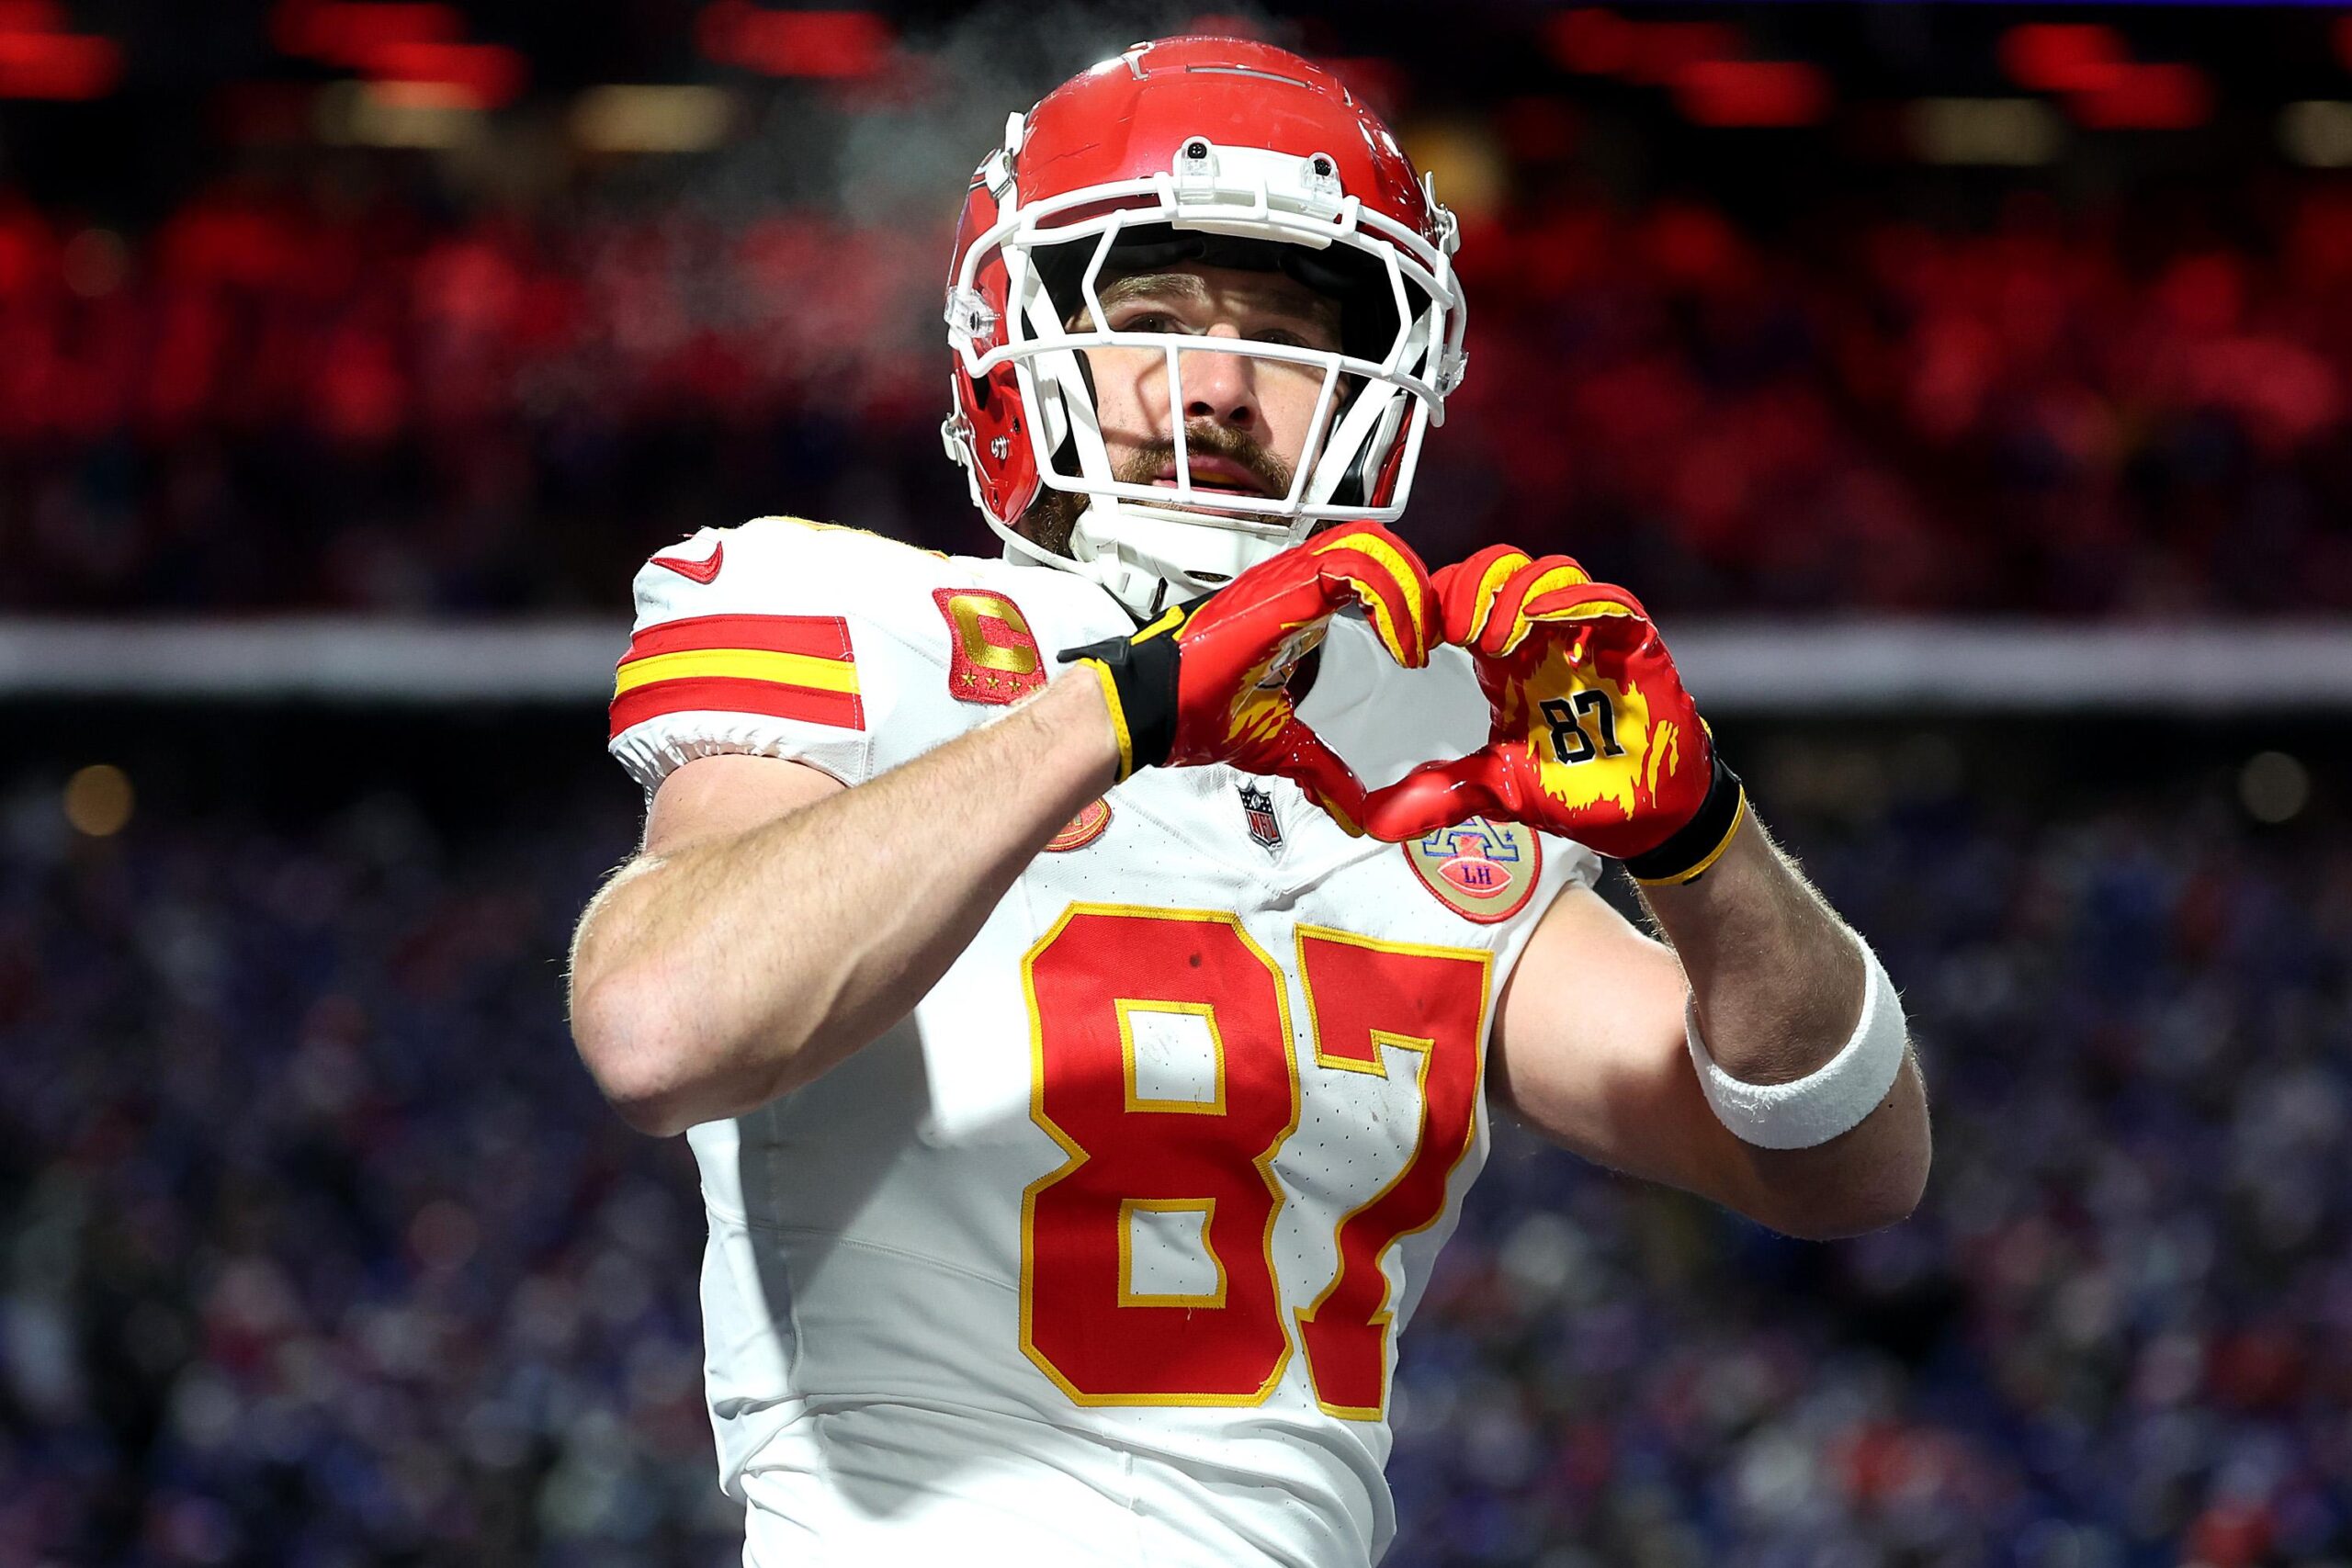 Kansas City Chiefs TE Travis Kelce Calls Out 'Disrespectful' Bills Mafia: “Had to spread the love, baby, always gotta spread that love,” Travis Kelce said. “There was a lot of hate pulling up to that stadium, man"